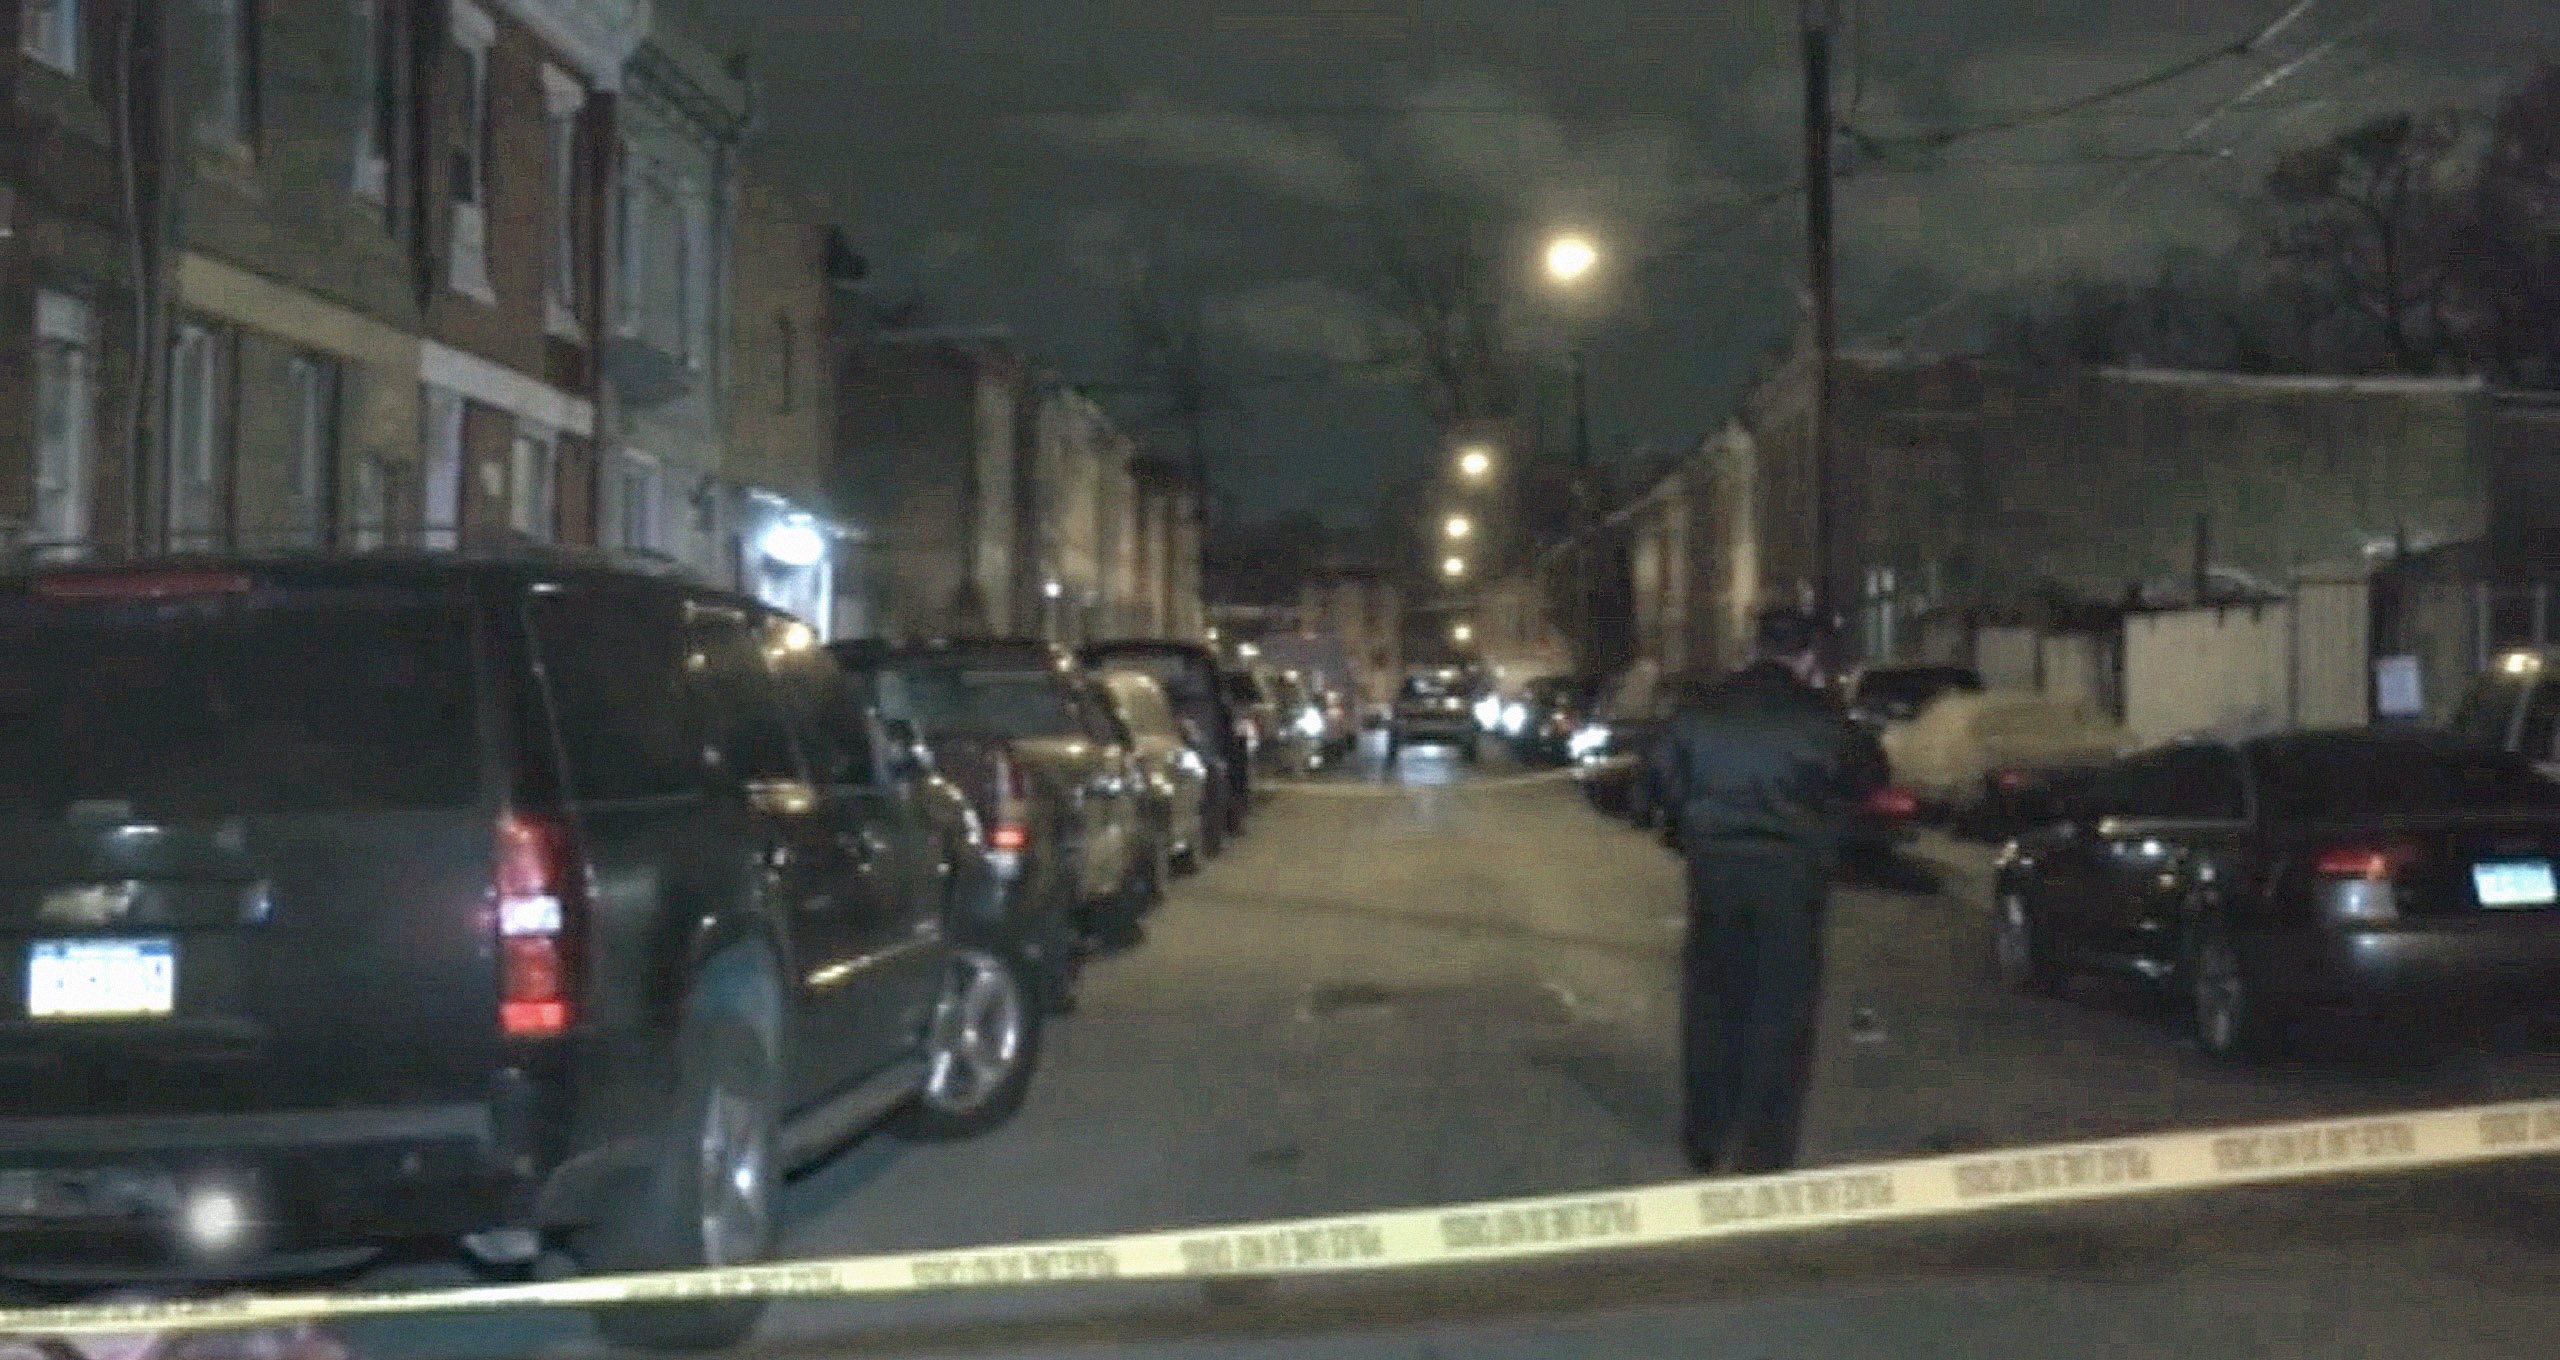 PHOTO: A teen was has died after sustaining multiple shot wounds while outdoors, in the Kensington neighborhood of Philadelphia, on Jan. 17, 2022. The gunmen also opened fire on a nearby residence, but the residents were unharmed.